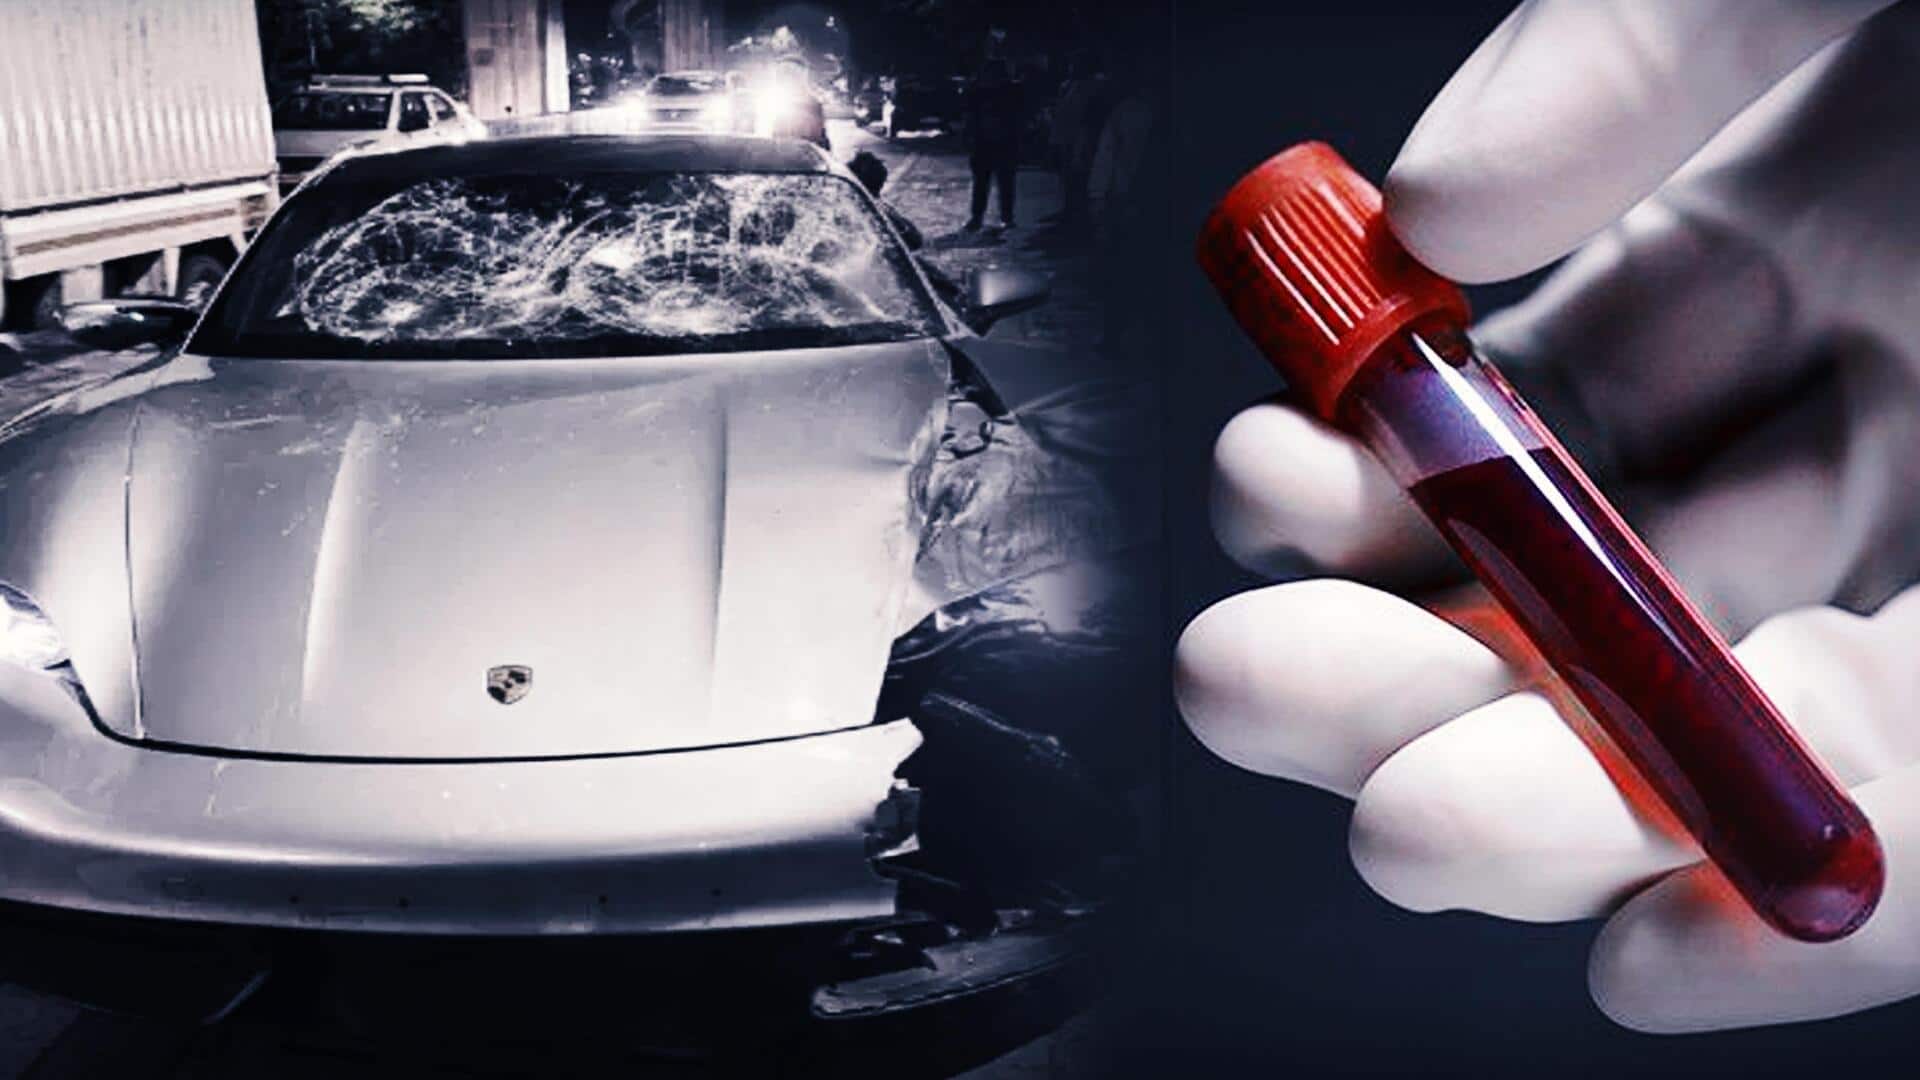 ₹3L paid to change blood samples of Porsche teen: Report